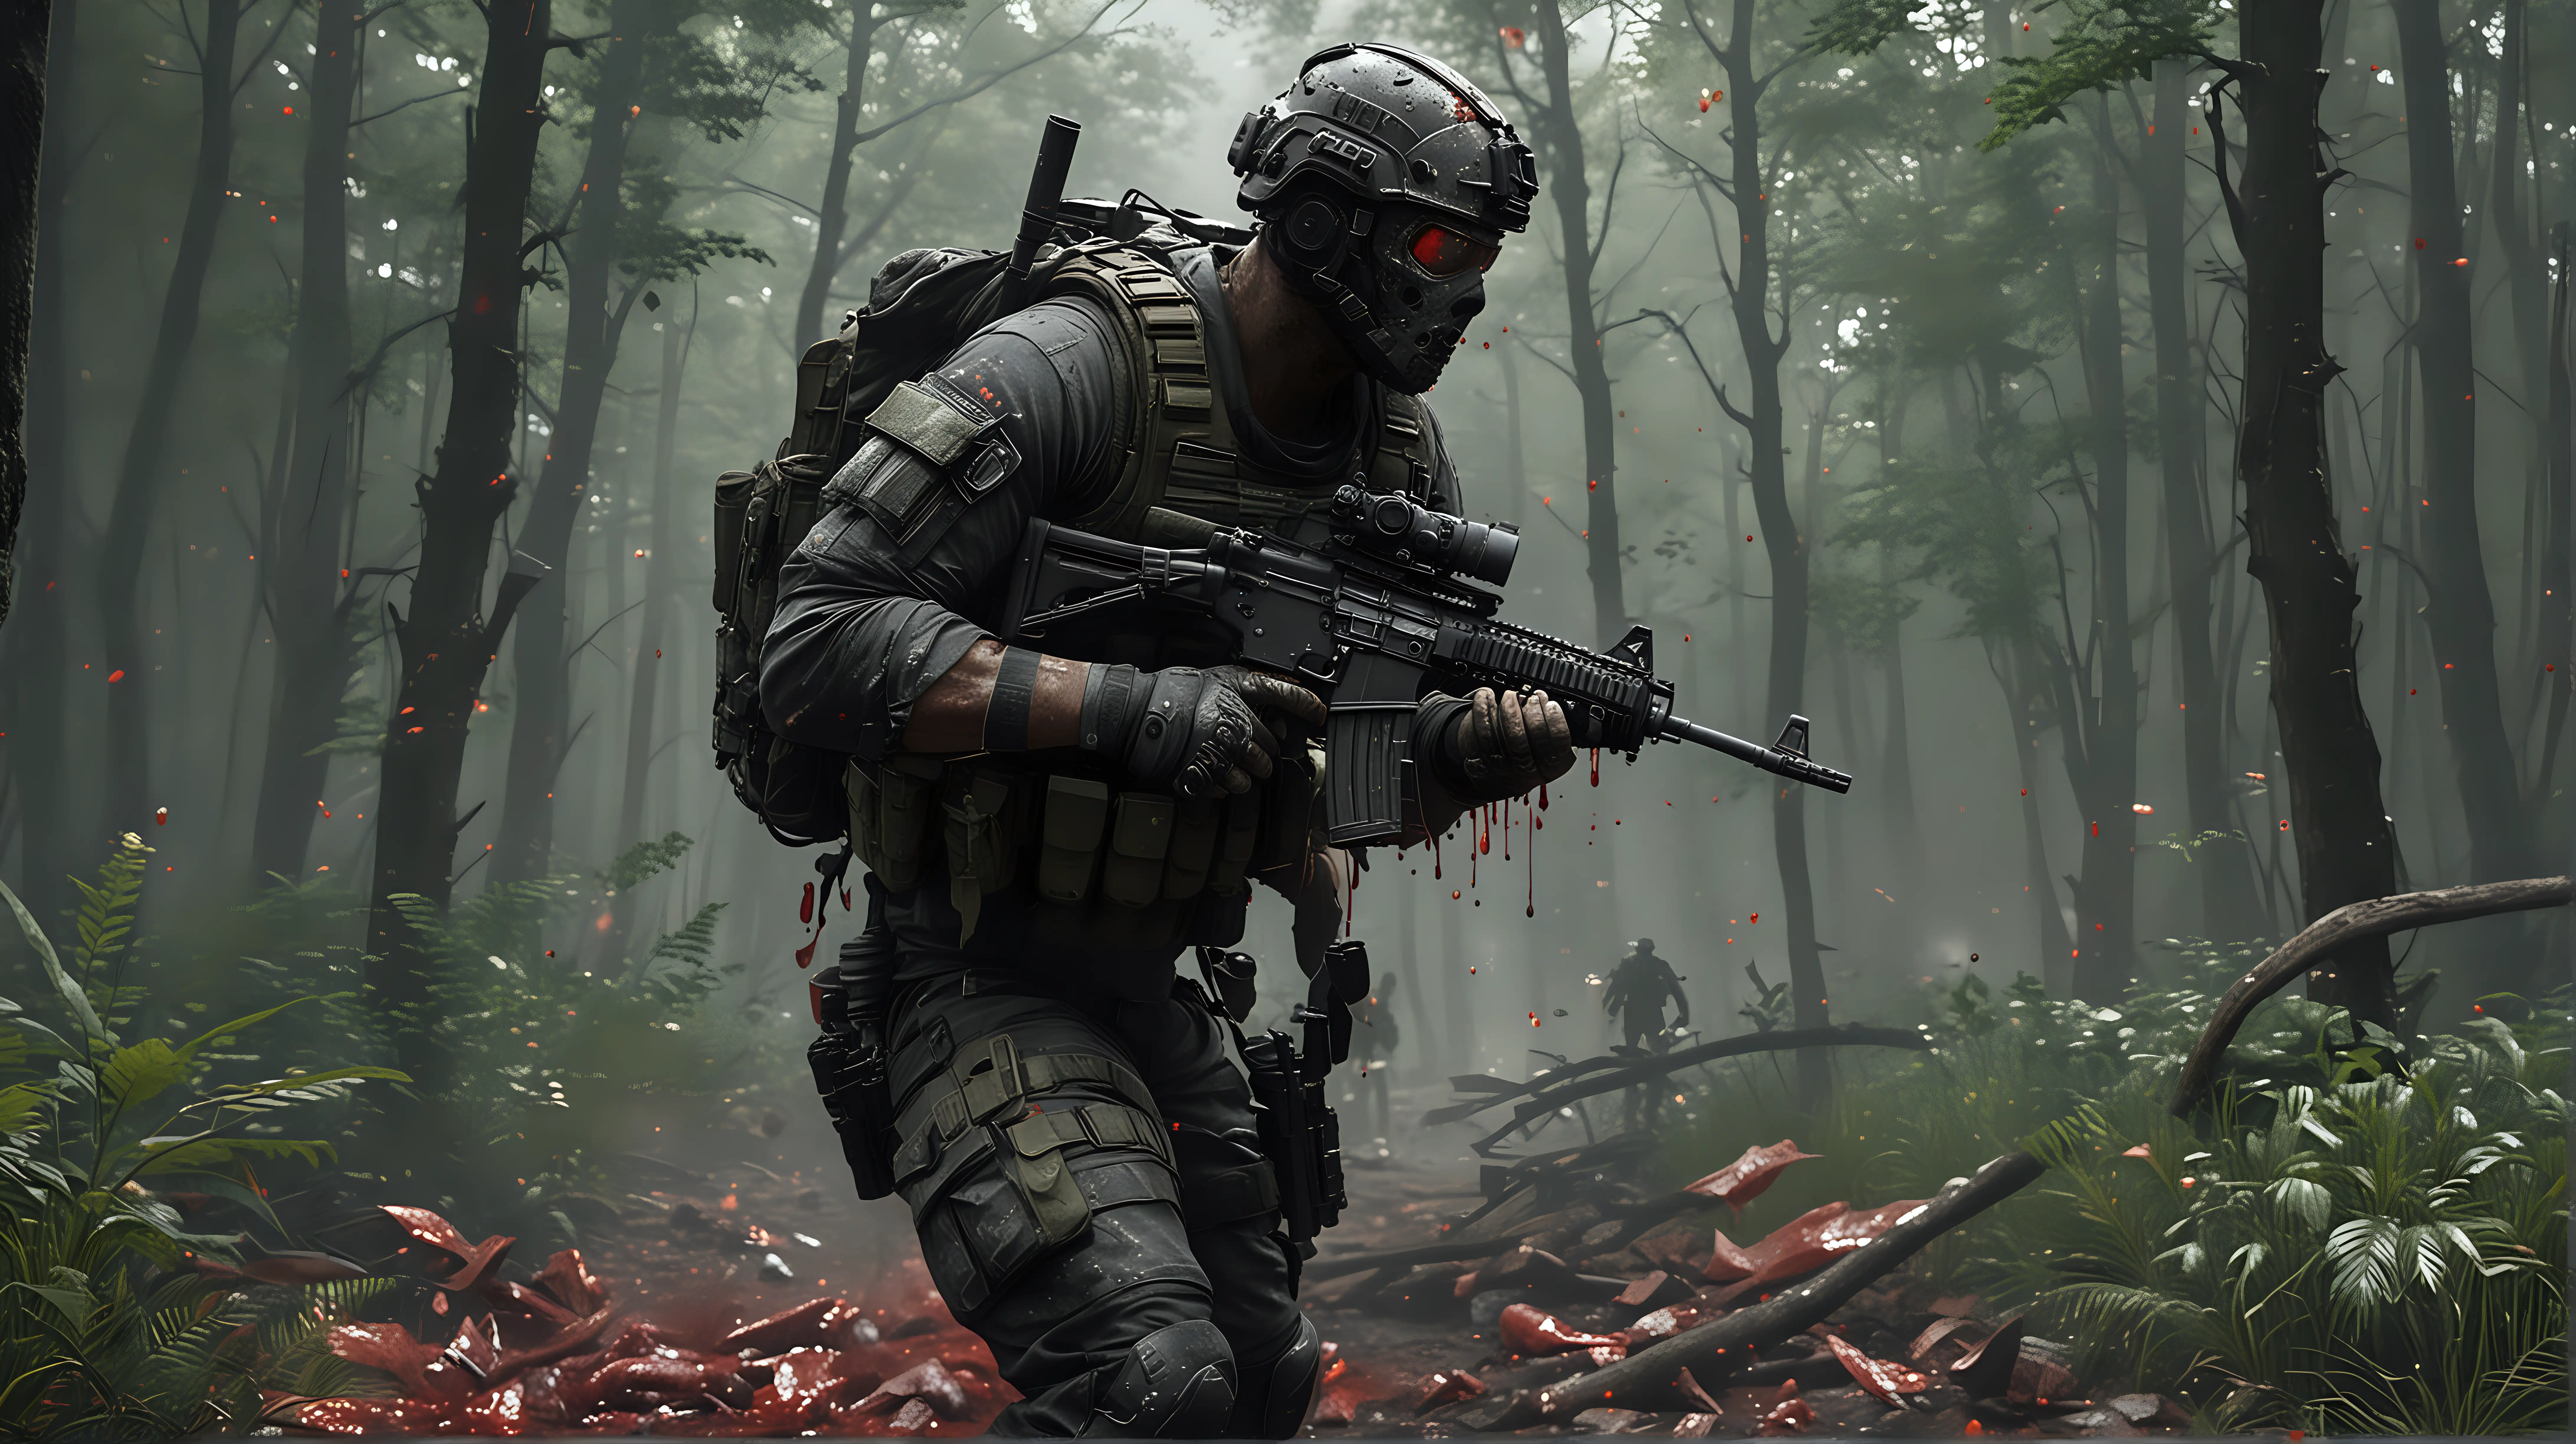 Generate a 4K hyperrealistic of ghost from the call of duty modern warfare series covered in blood and his body fill with cuts.
the background of the image should be in a green lush forest area